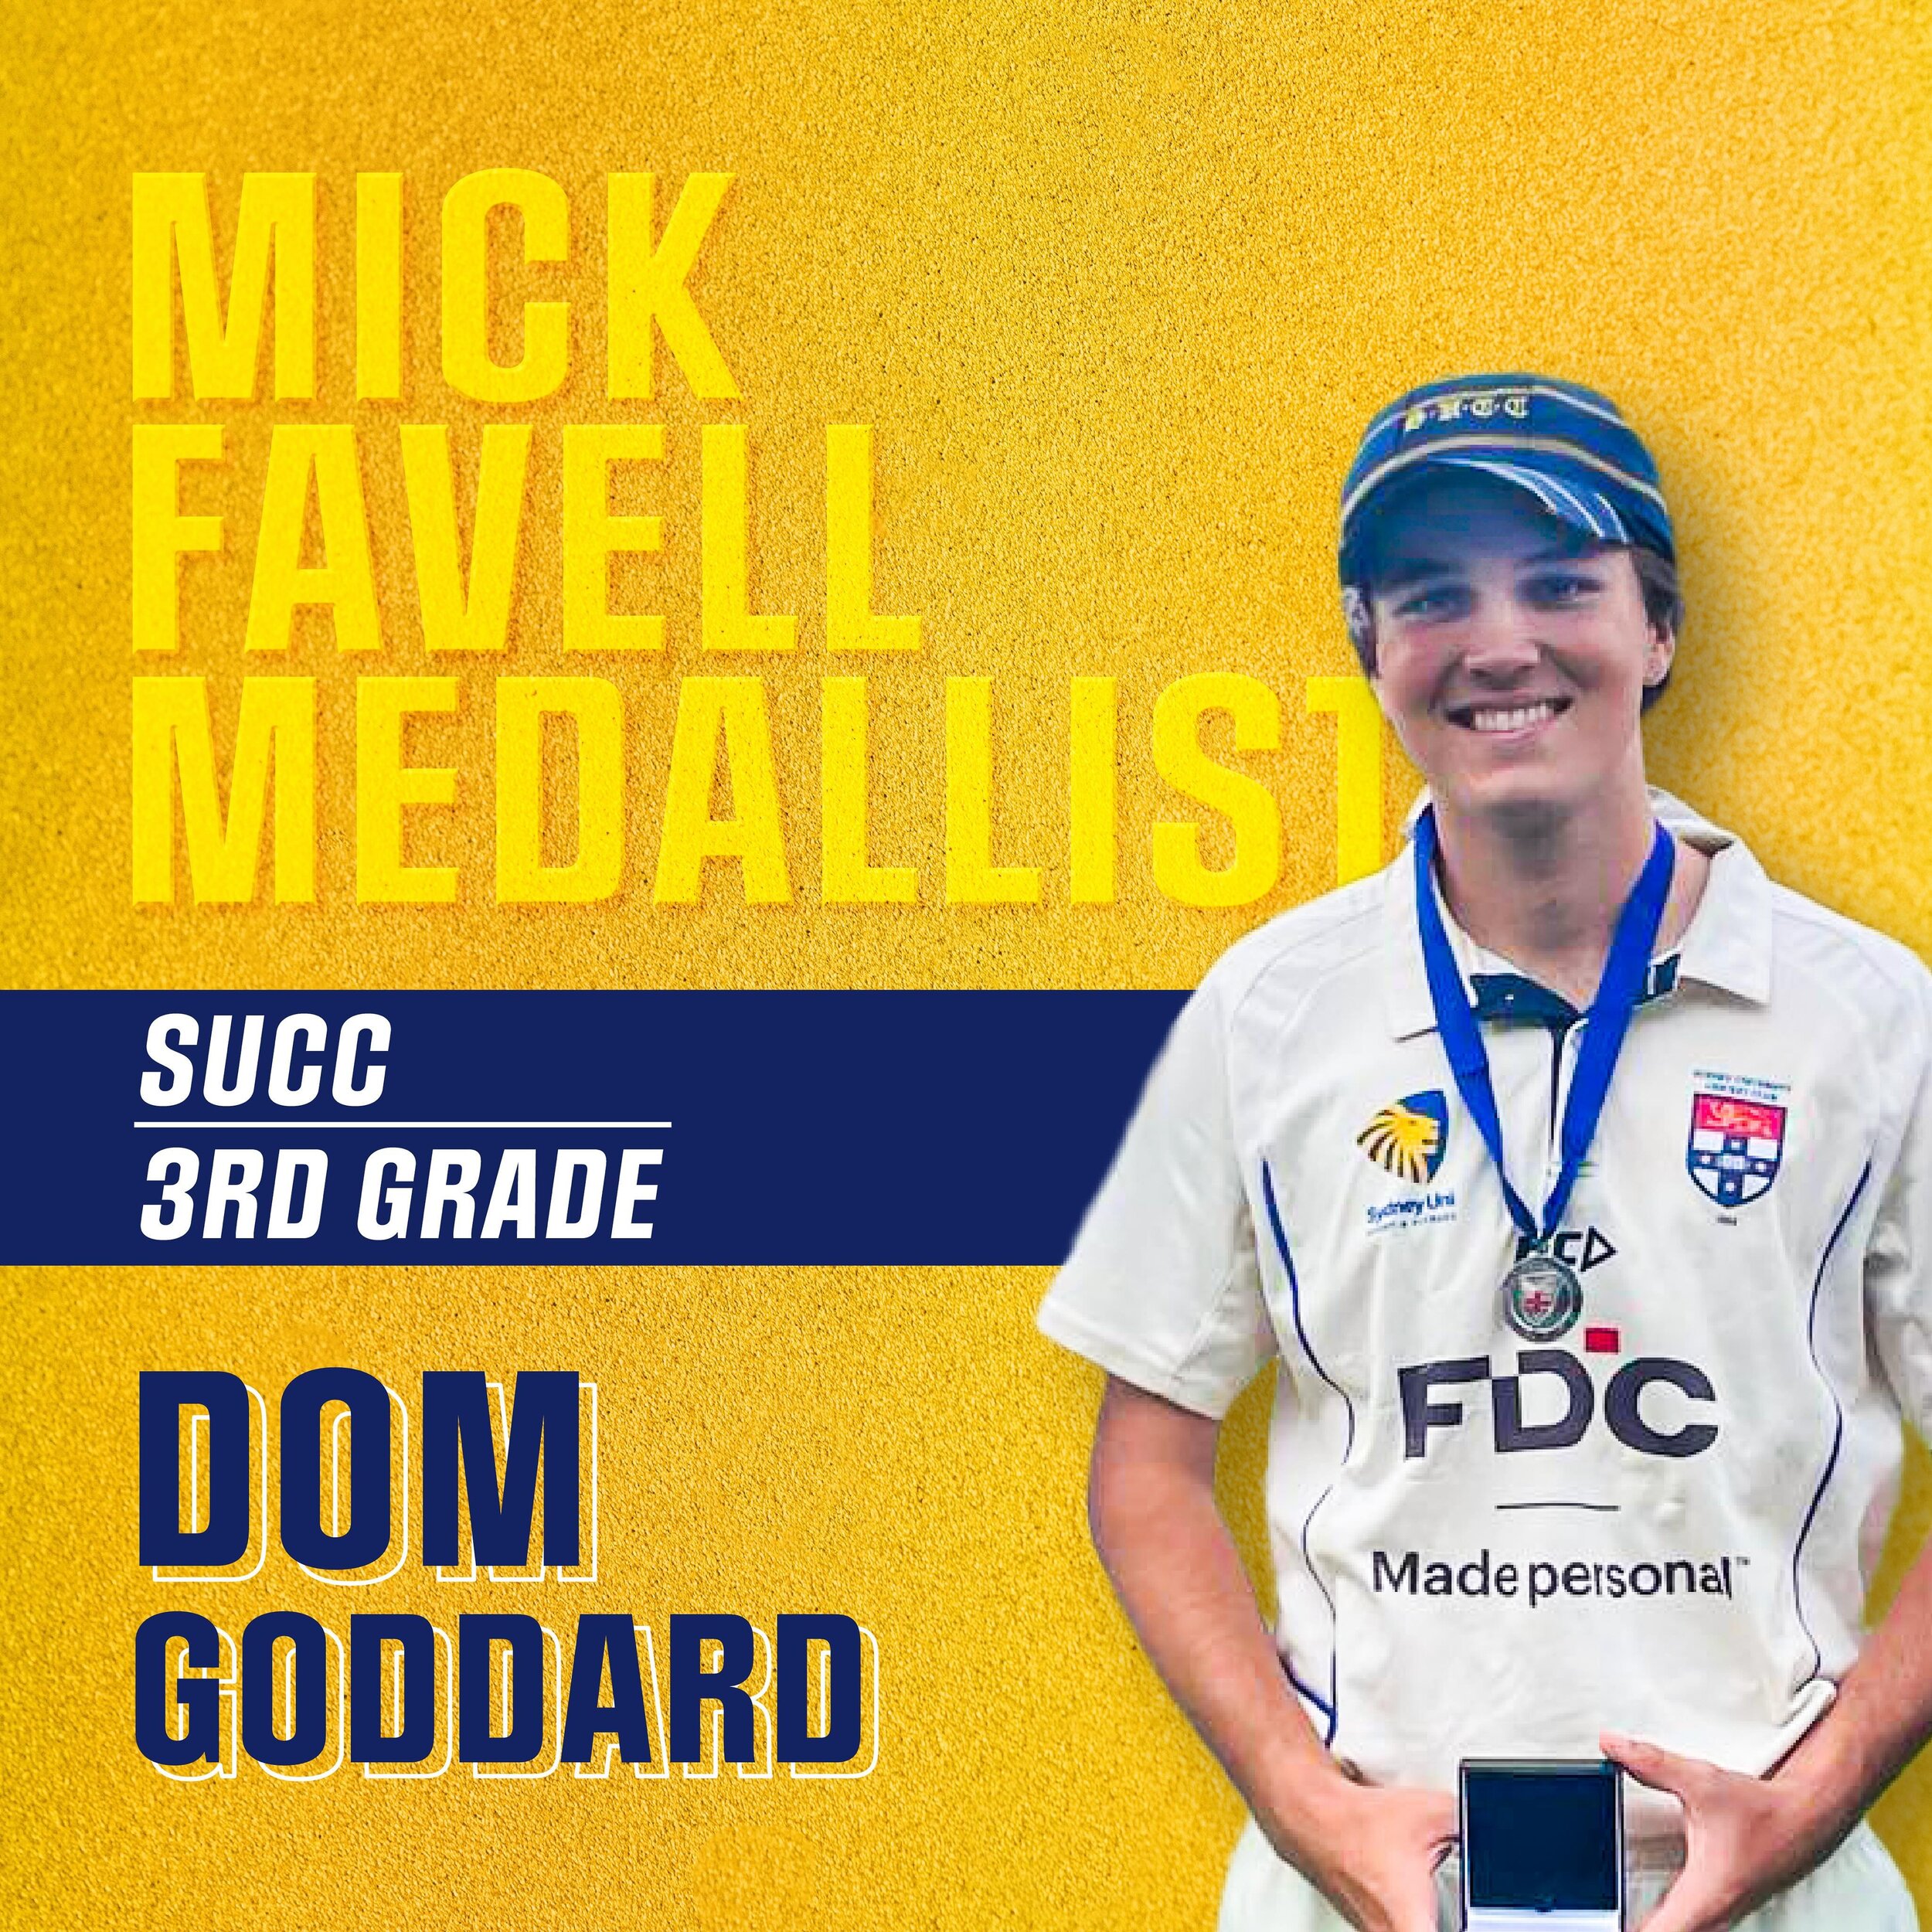 Just one week after dislocating his shoulder in the 3rd Grade semi-final, Dom Goddard was awarded the player of the match in the grand final. 

His crucial innings of 73 laid the foundation for the lower order to finish the job and win their side the